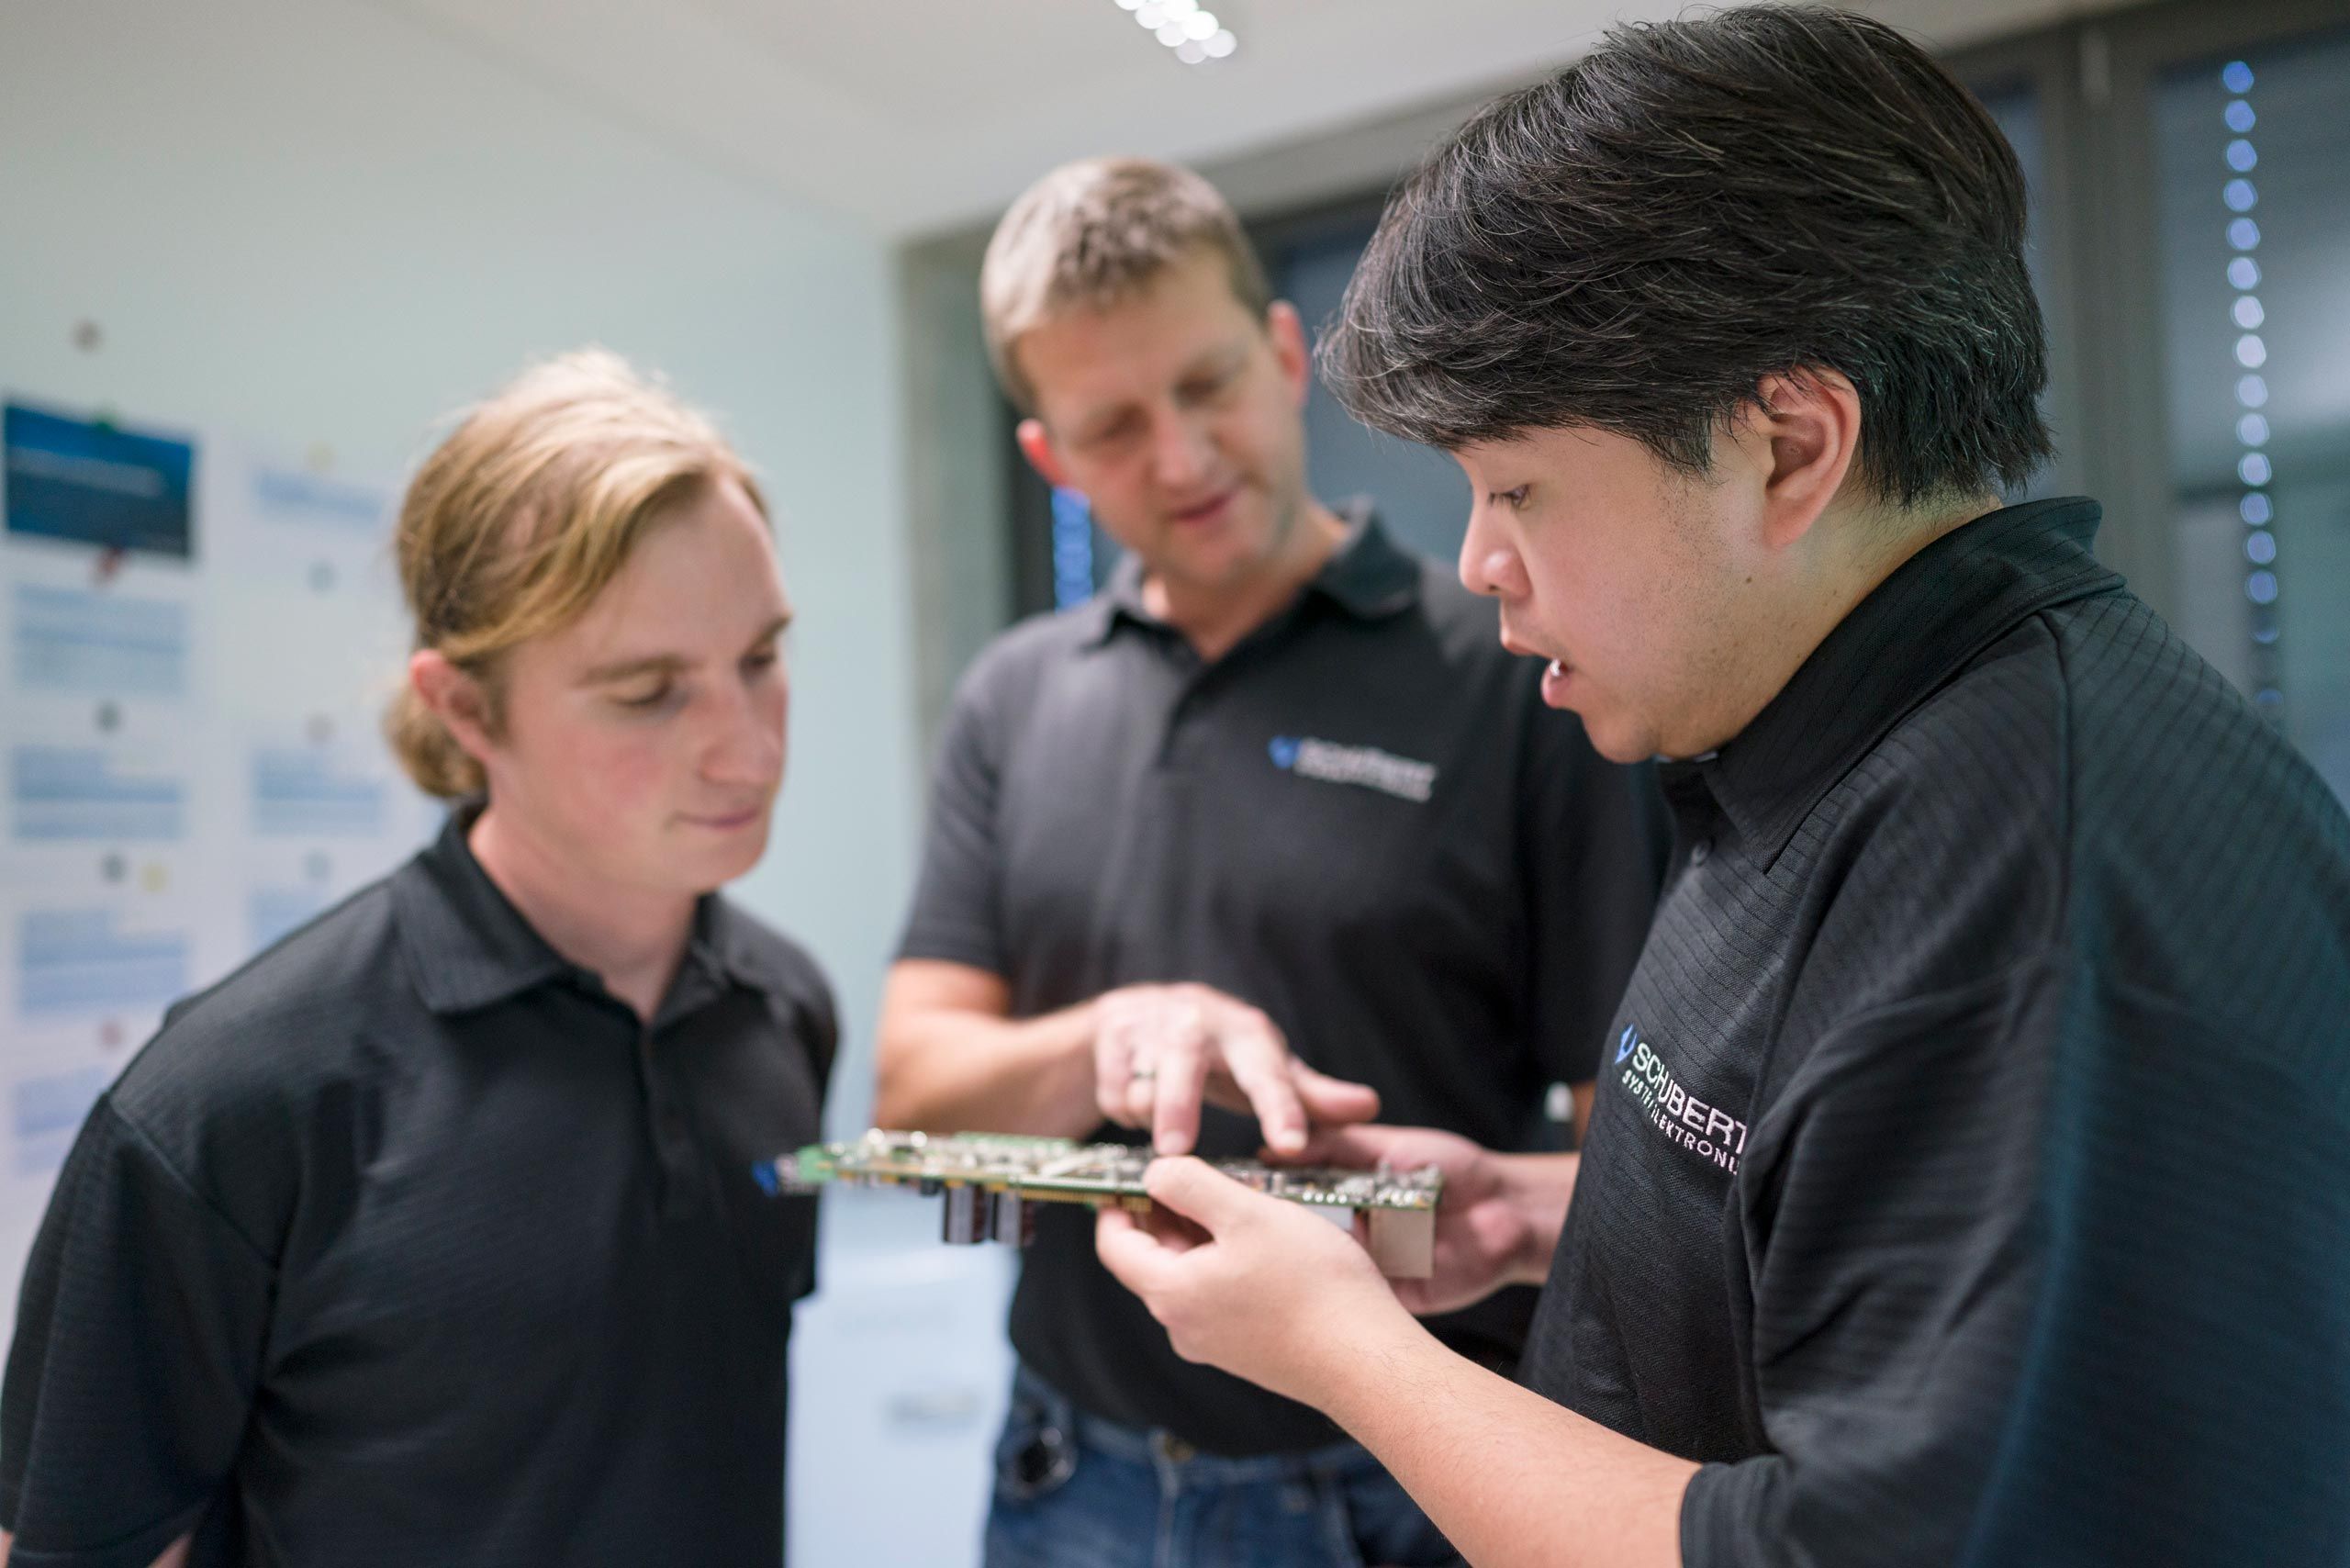 Three employees in a conversation. One holds an electronic component and shows it to the others